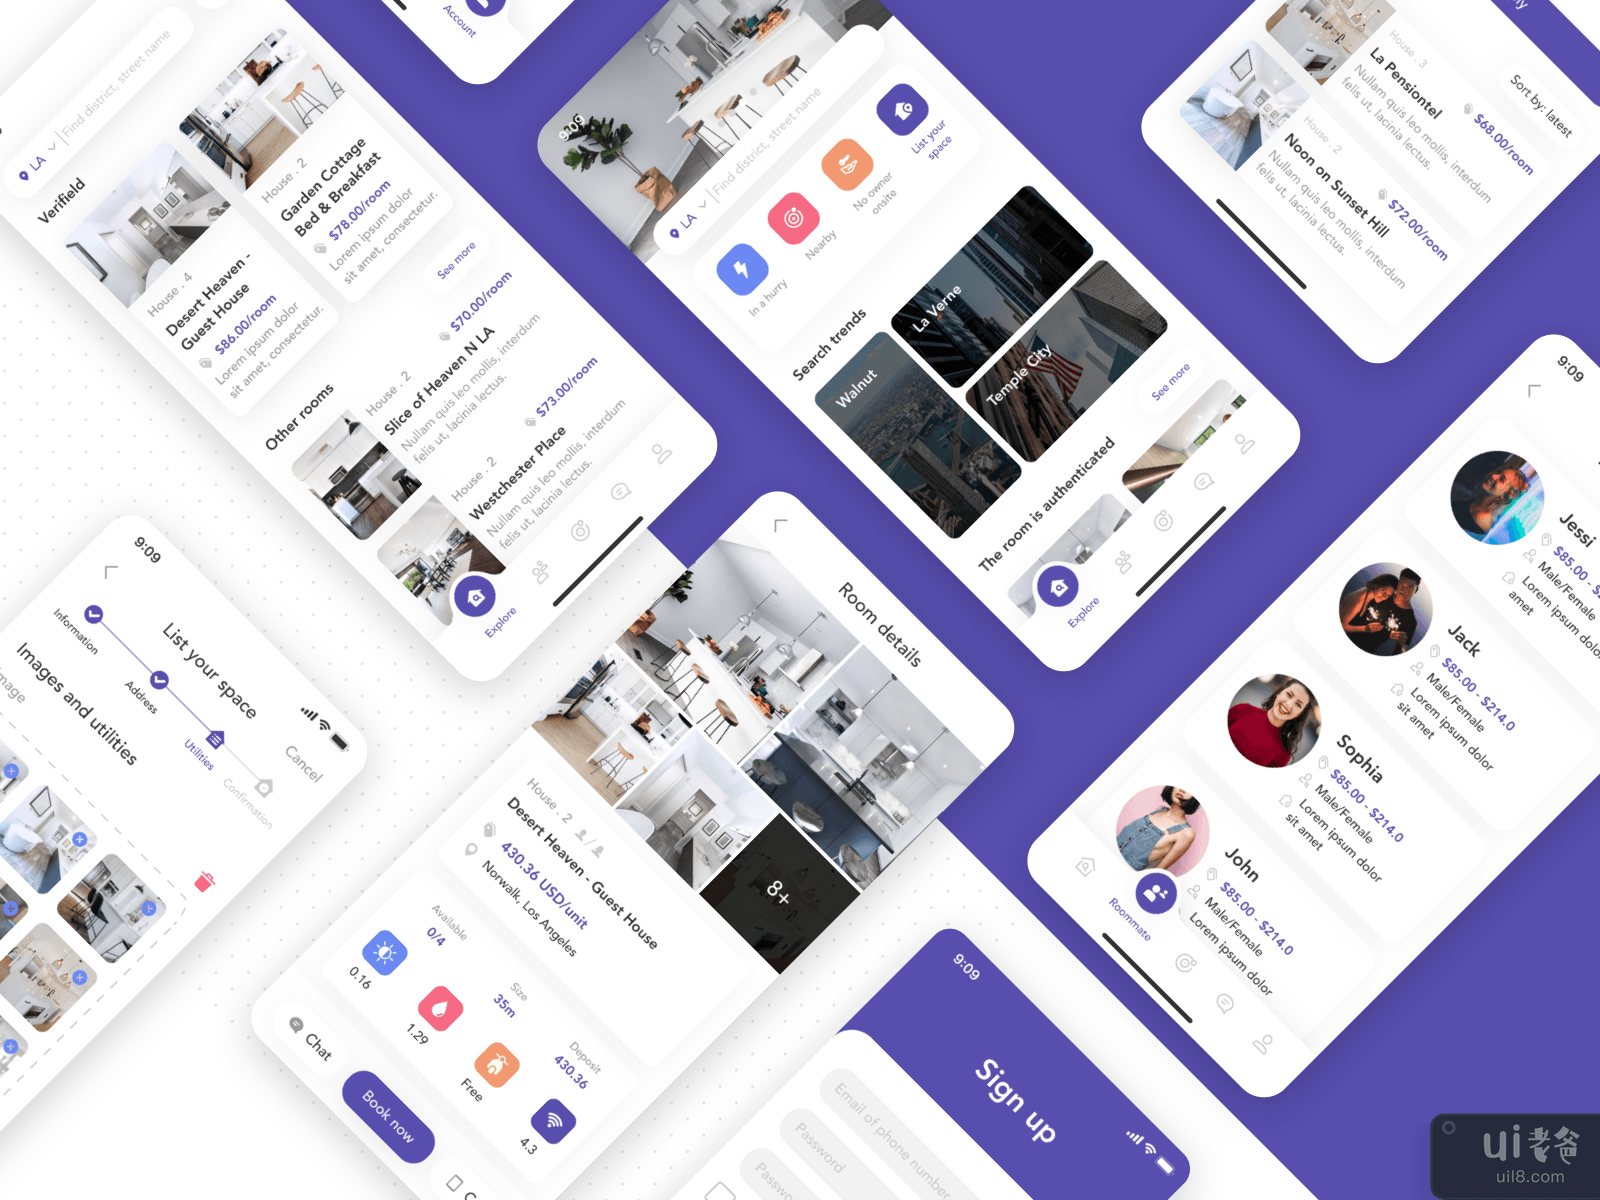 RentHouse - Simply Home Search Mobile App UI KIT #7